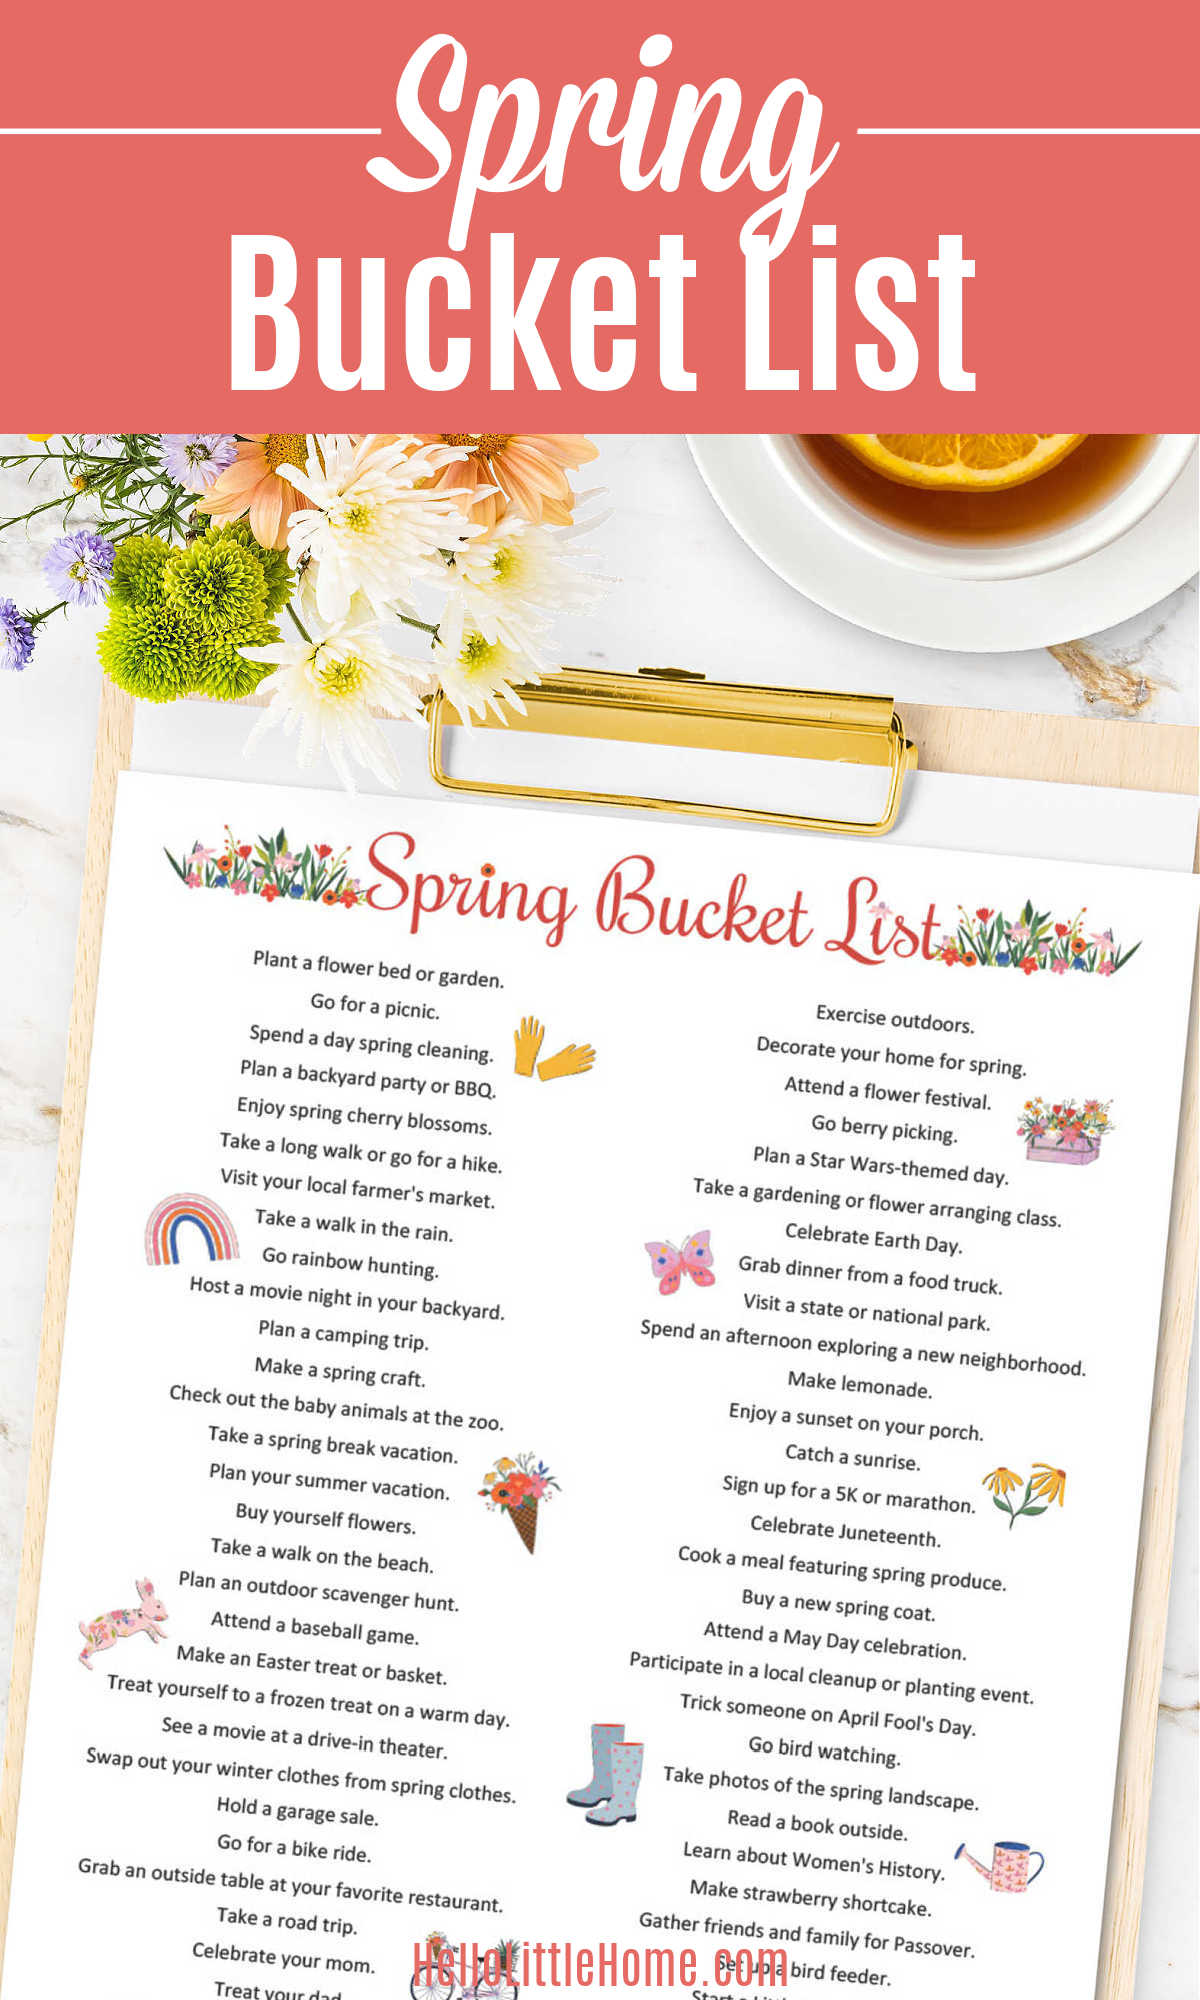 A clipboard with a spring bucket list next to a bouquet and a cup of tea.